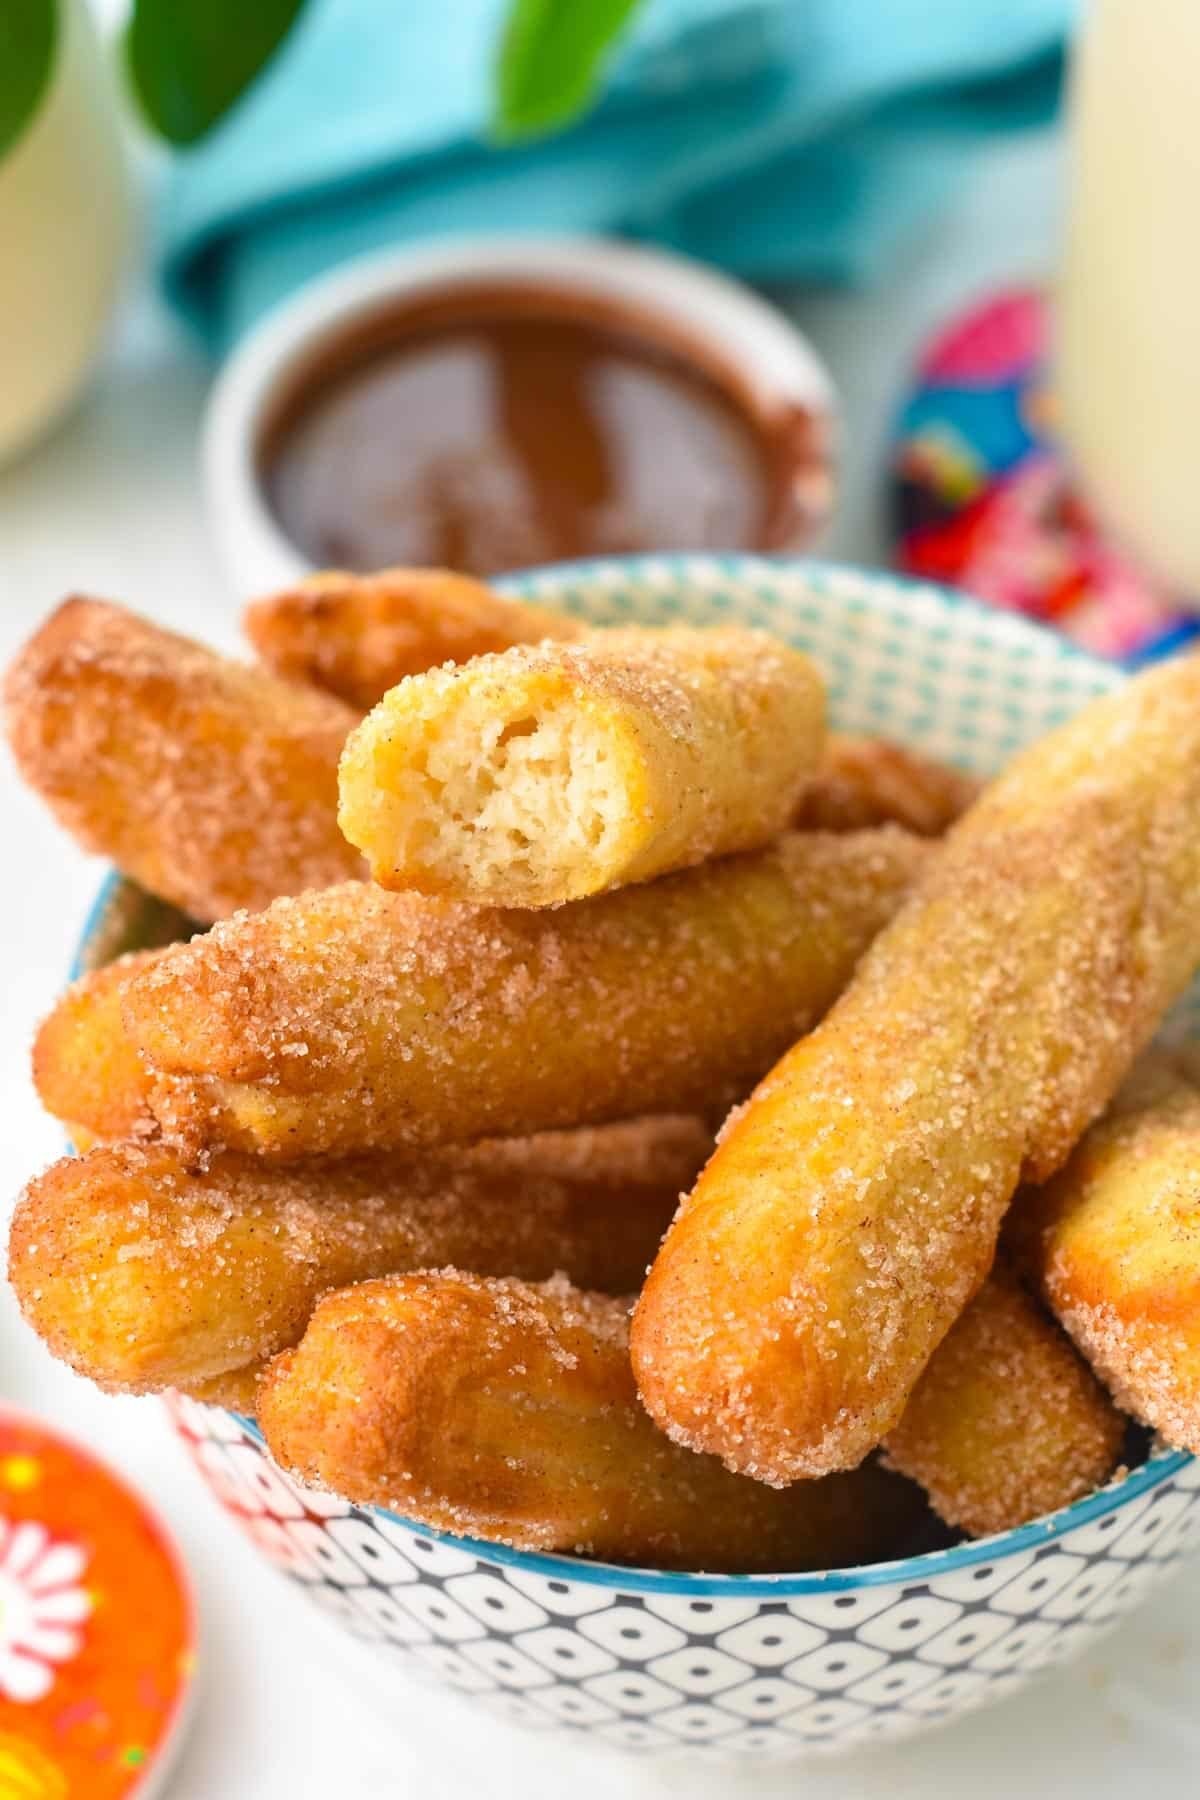 a bowl filled with golden air fryer churros coated with cinnamon sugar, one on top half eaten showing the airy texture of the churros, and chocolate sauce in the background